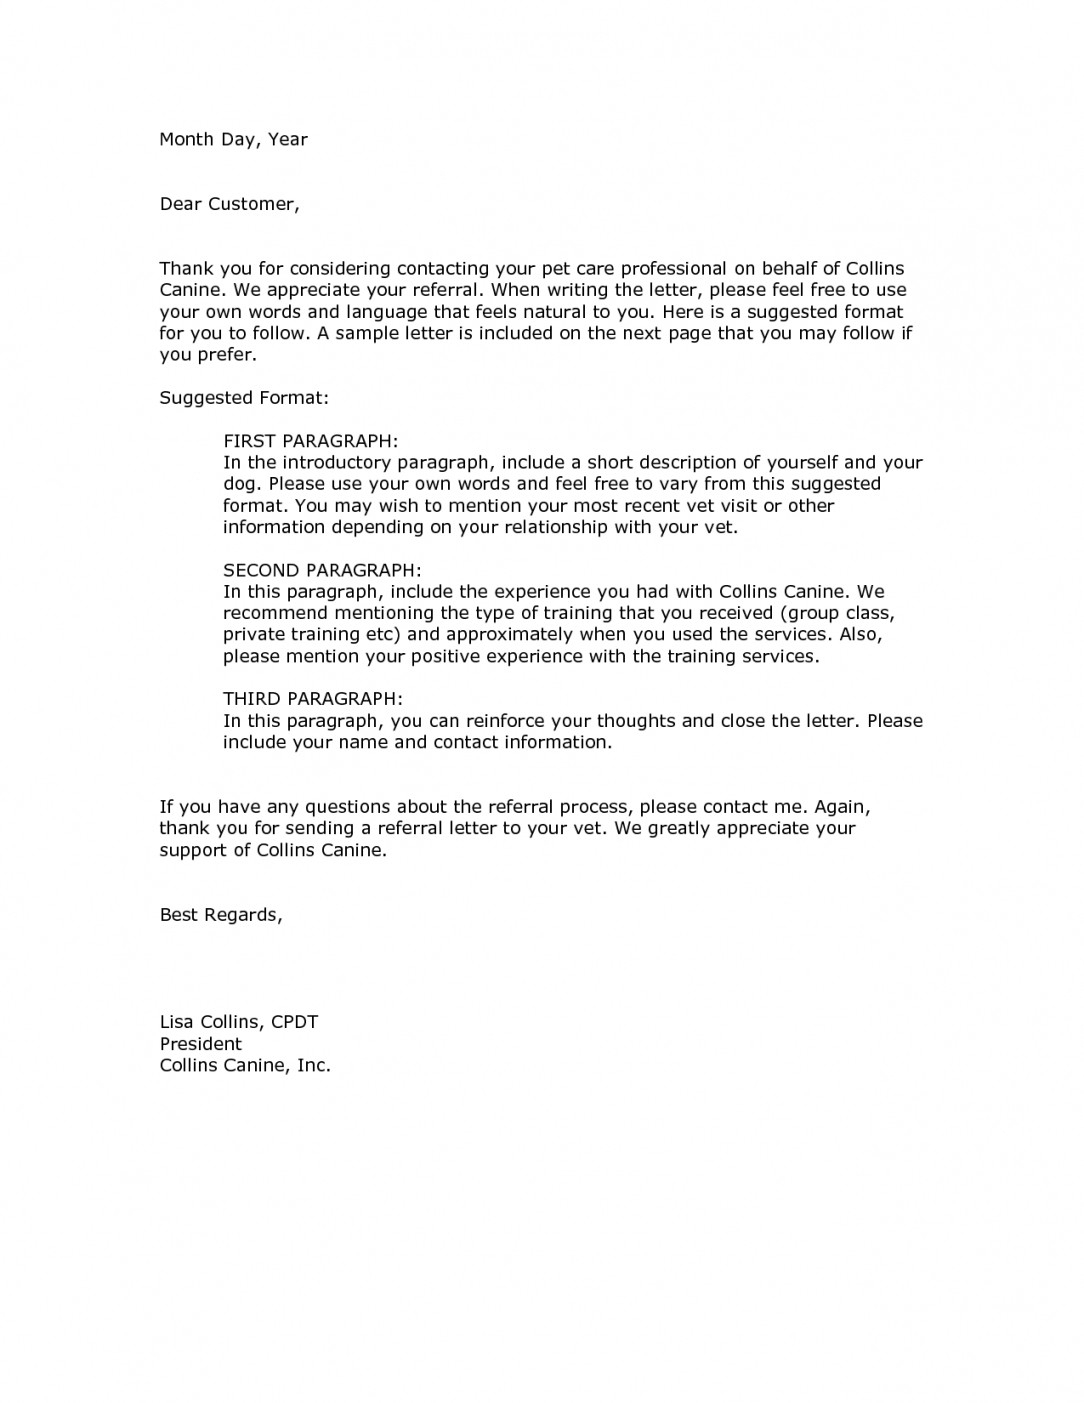 Customer Reference Letter Template - Client Referral Letter Template Business Thank You Letter Sample